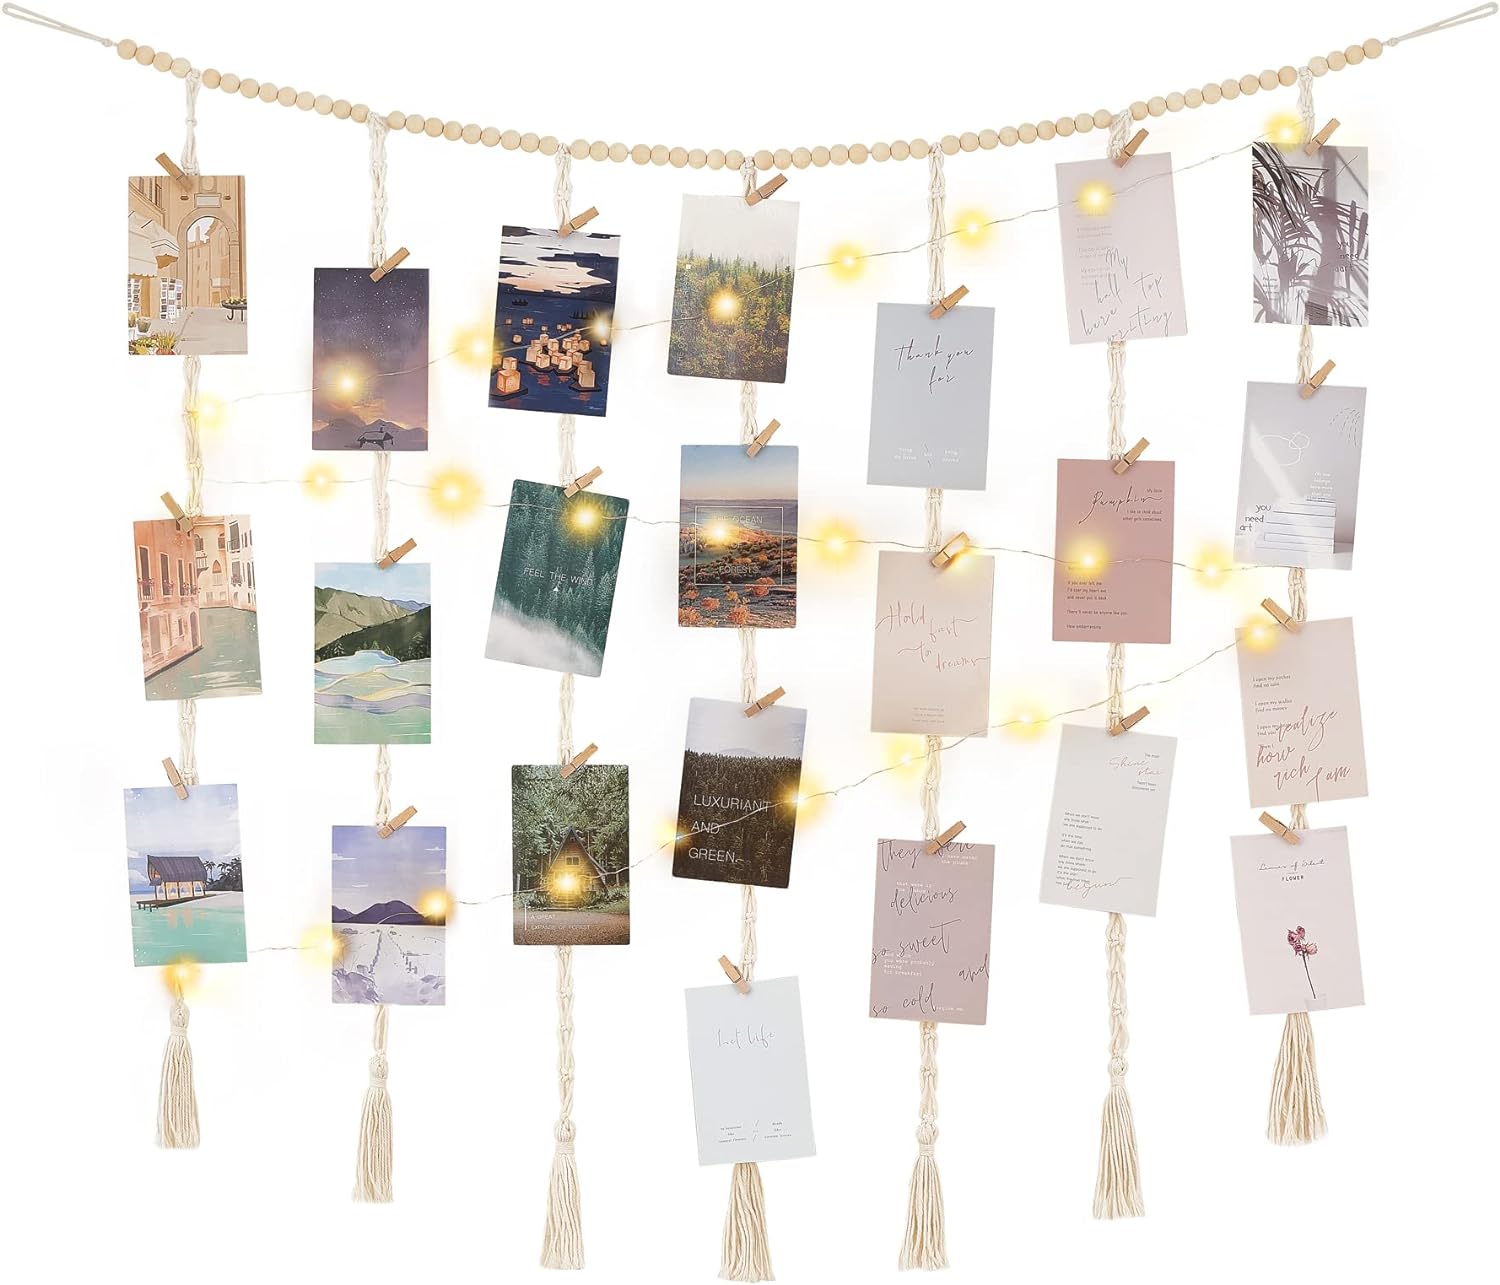 Mkono Macrame Hanging Photo Display Wall Decor with String Lights, Boho Wooden Beads Garland Collage Picture Card Frame Holder with 45 Clips for Bedroom Living Room Dorm, Teen Girl Teenage Gifts